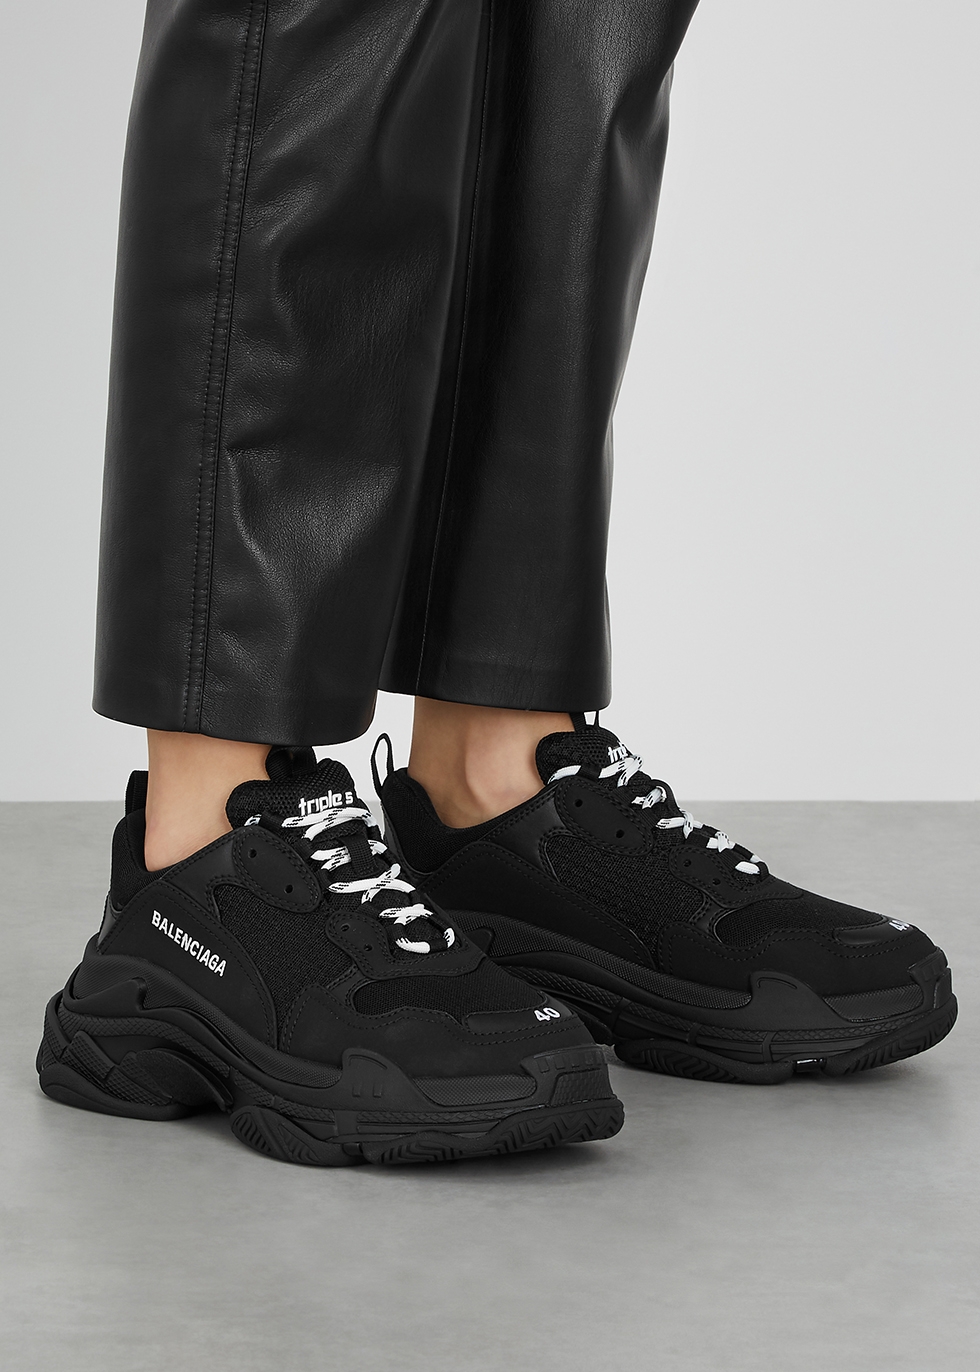 Balenciagas Chunky Triple S 13 Best Alternatives to Buy Now